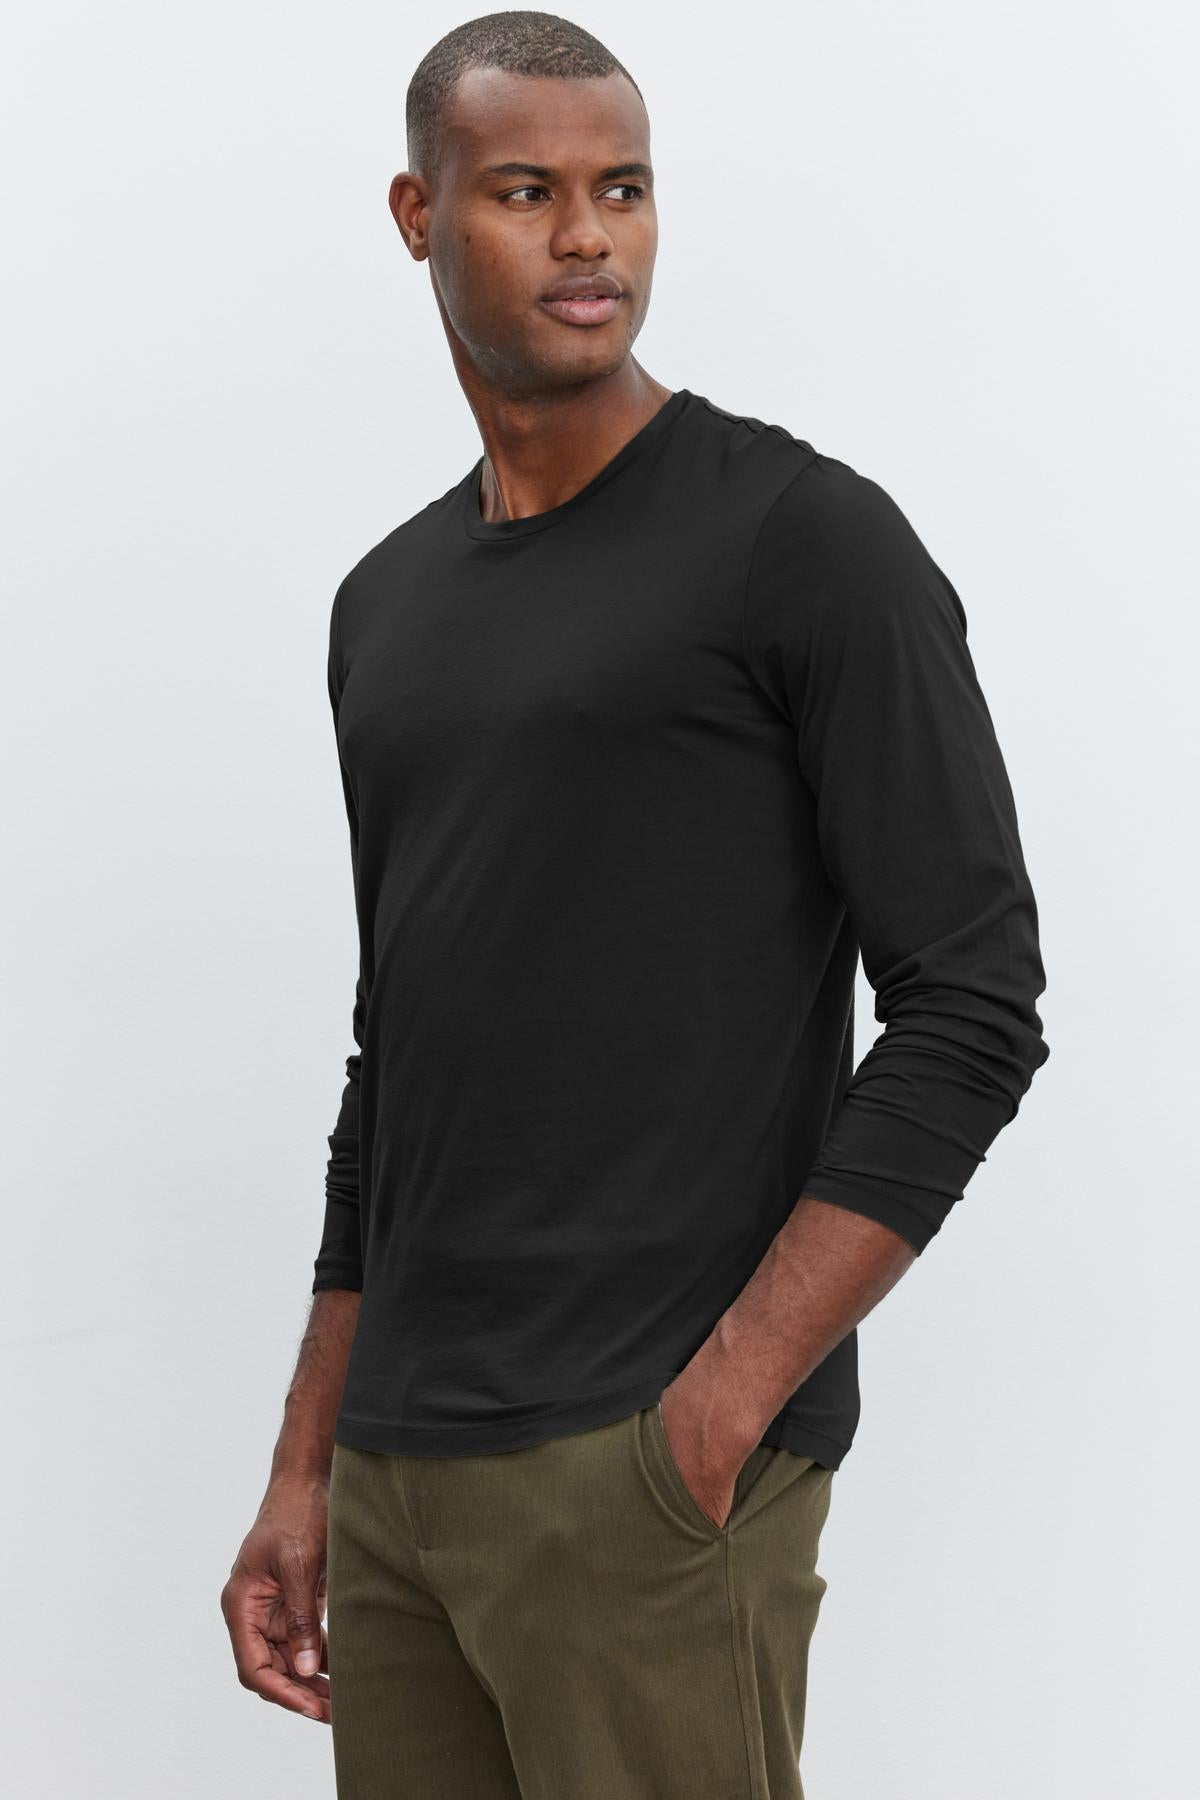   A man in a SKEETER WHISPER CLASSIC CREW NECK TEE by Velvet by Graham & Spencer and olive pants stands against a plain background, looking to the side. 